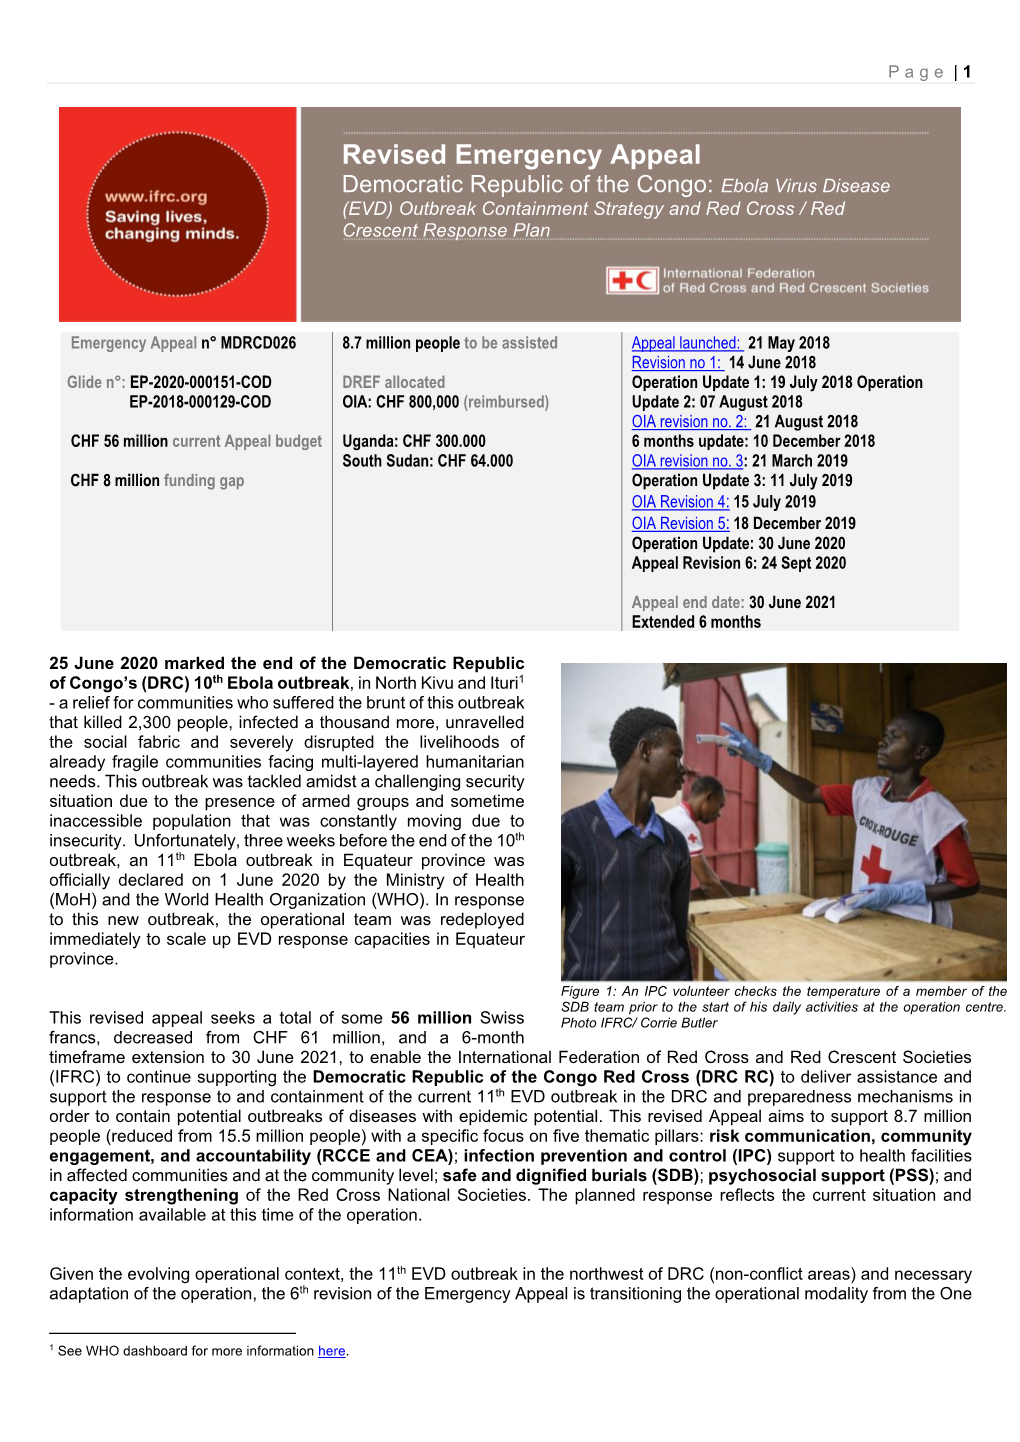 Revised Emergency Appeal Democratic Republic of the Congo: Ebola Virus Disease (EVD) Outbreak Containment Strategy and Red Cross / Red Crescent Response Plan